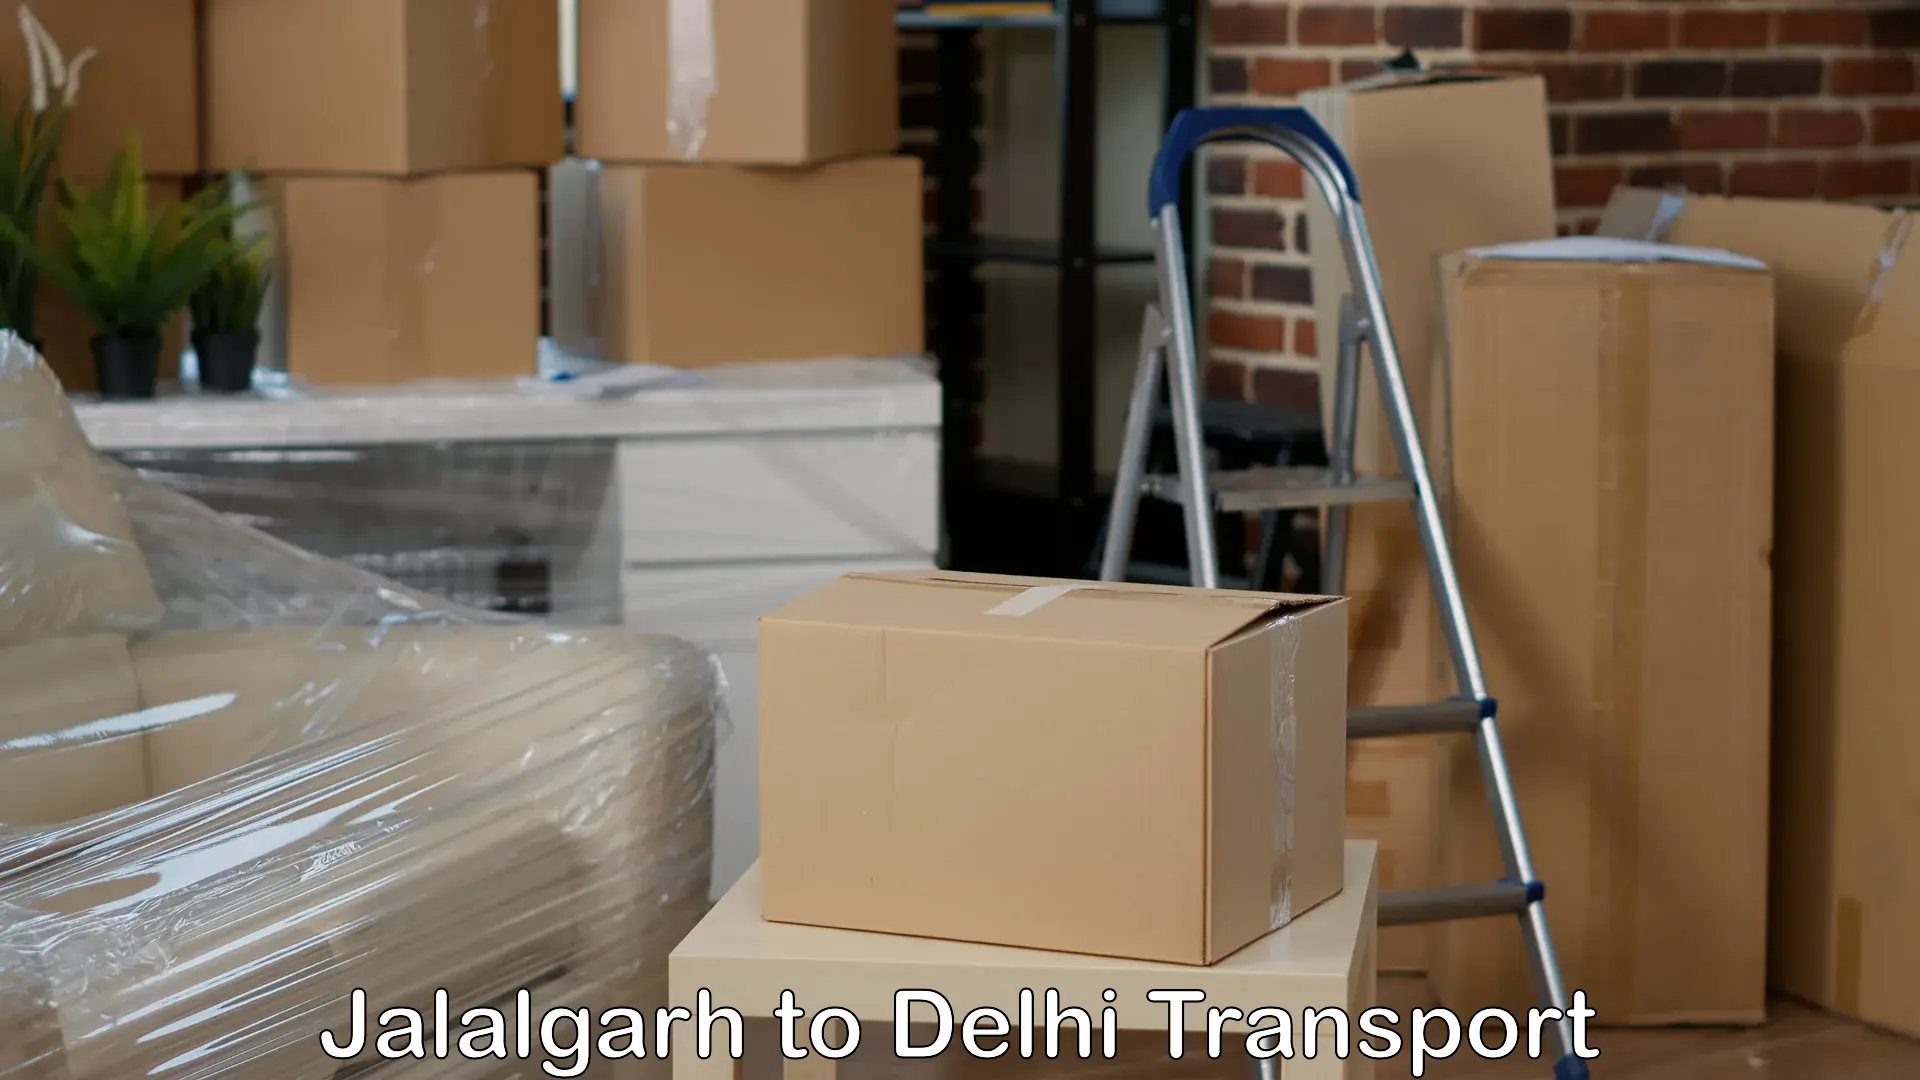 Truck transport companies in India Jalalgarh to NCR